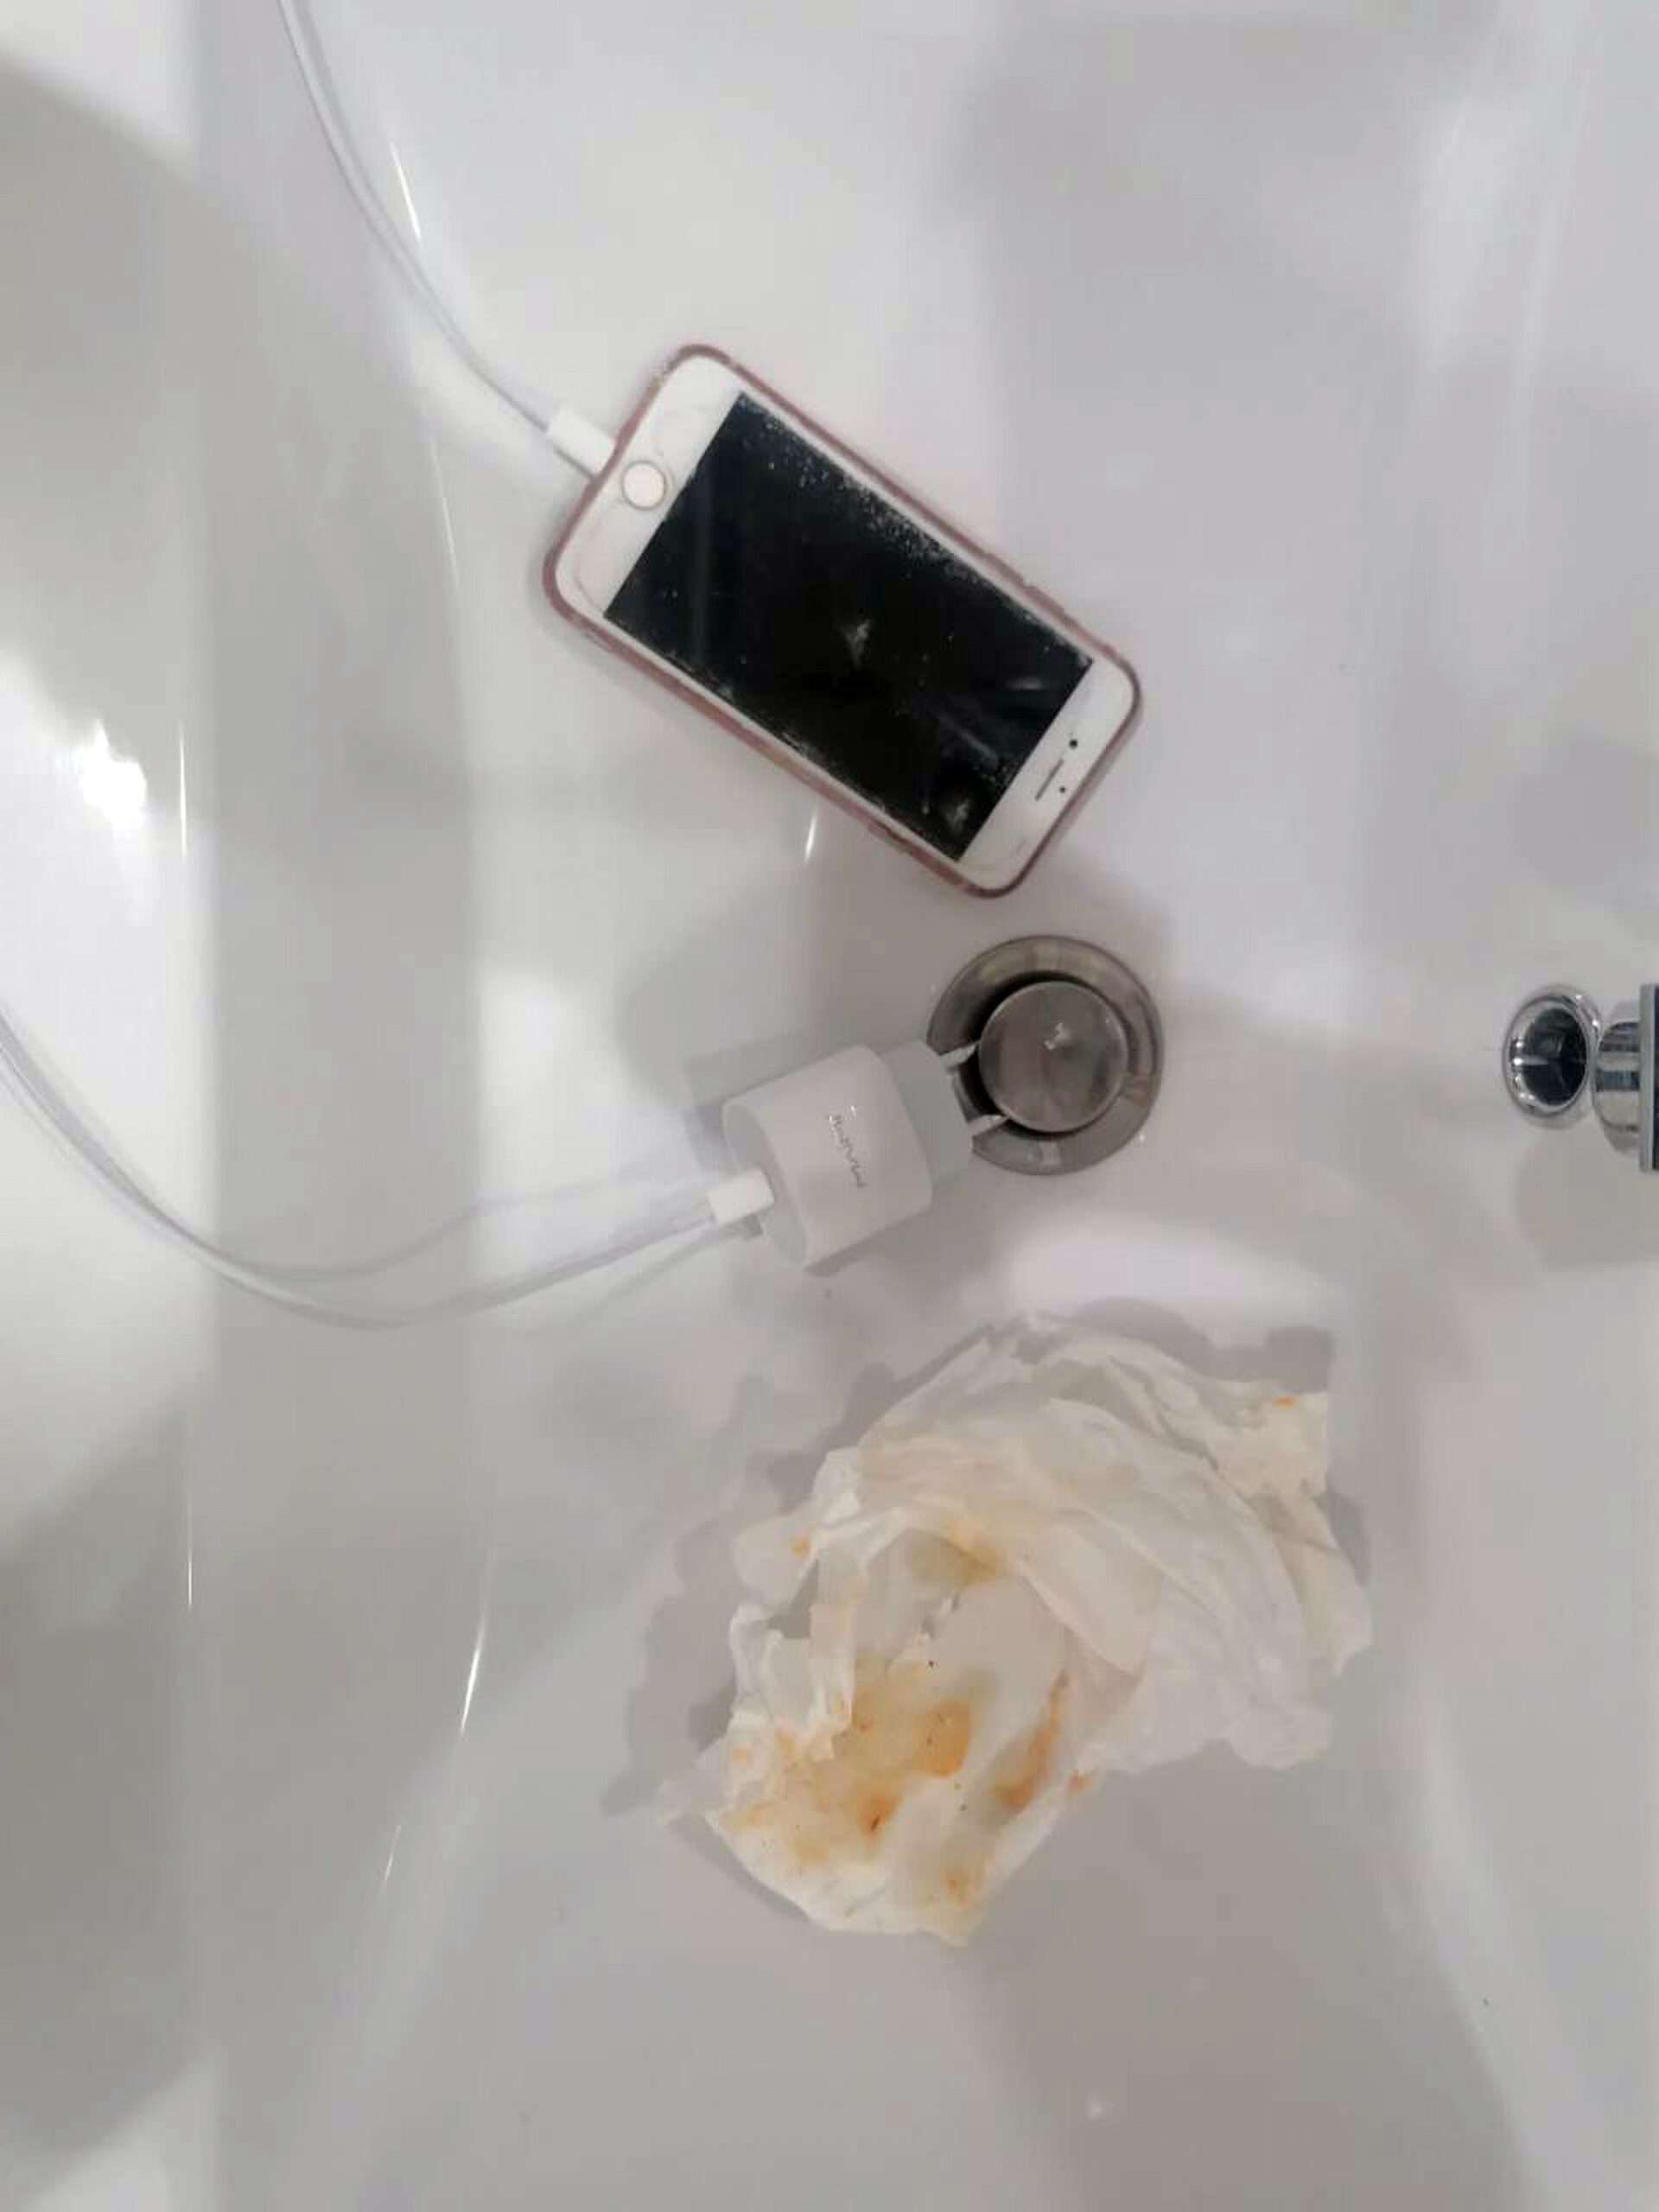 Read more about the article Girl, 10, Electrocuted After She Dropped Her Phone In The Bathtub While It Was Charging